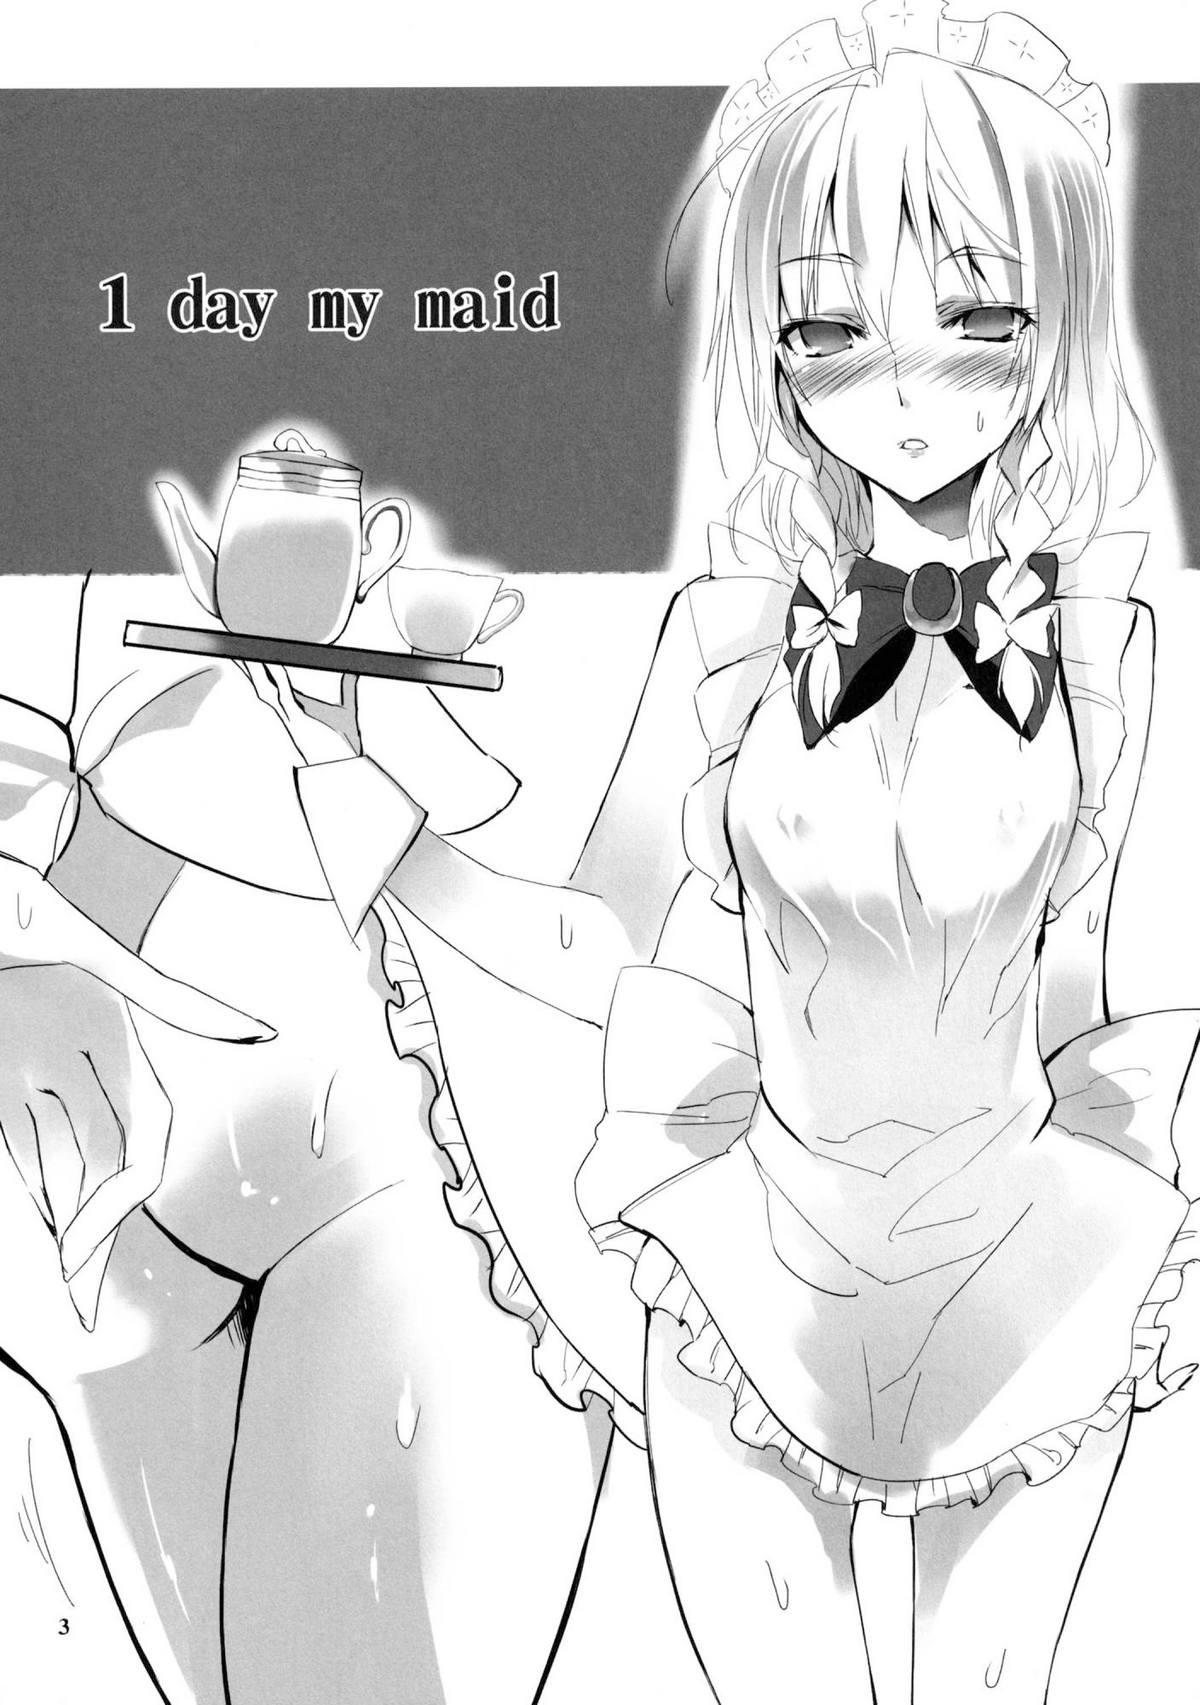 Chunky 1 day my maid - Touhou project Oral Sex - Page 3